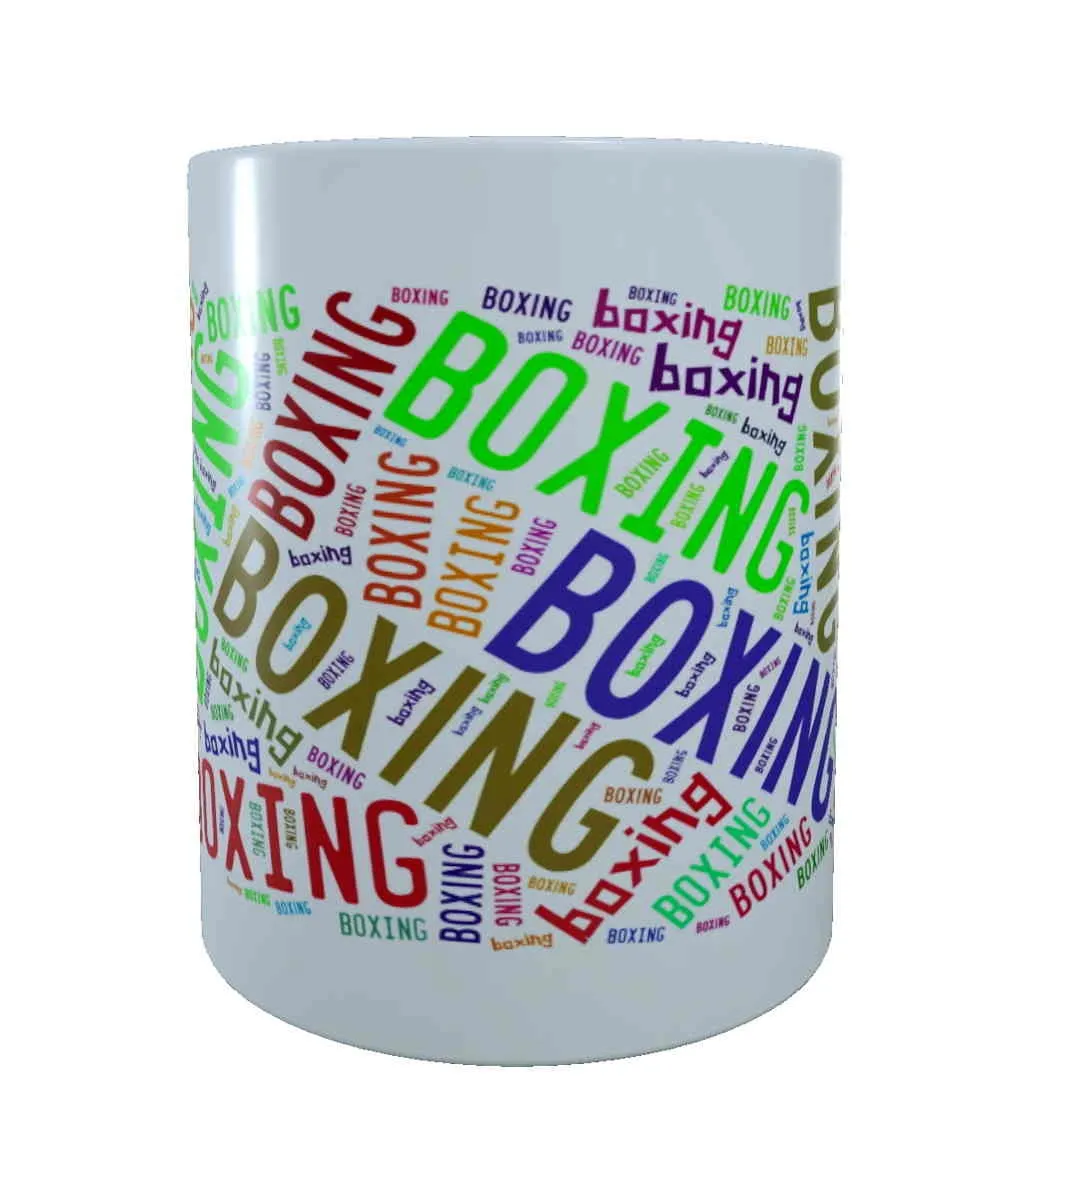 cup white printed with Boxing colourful